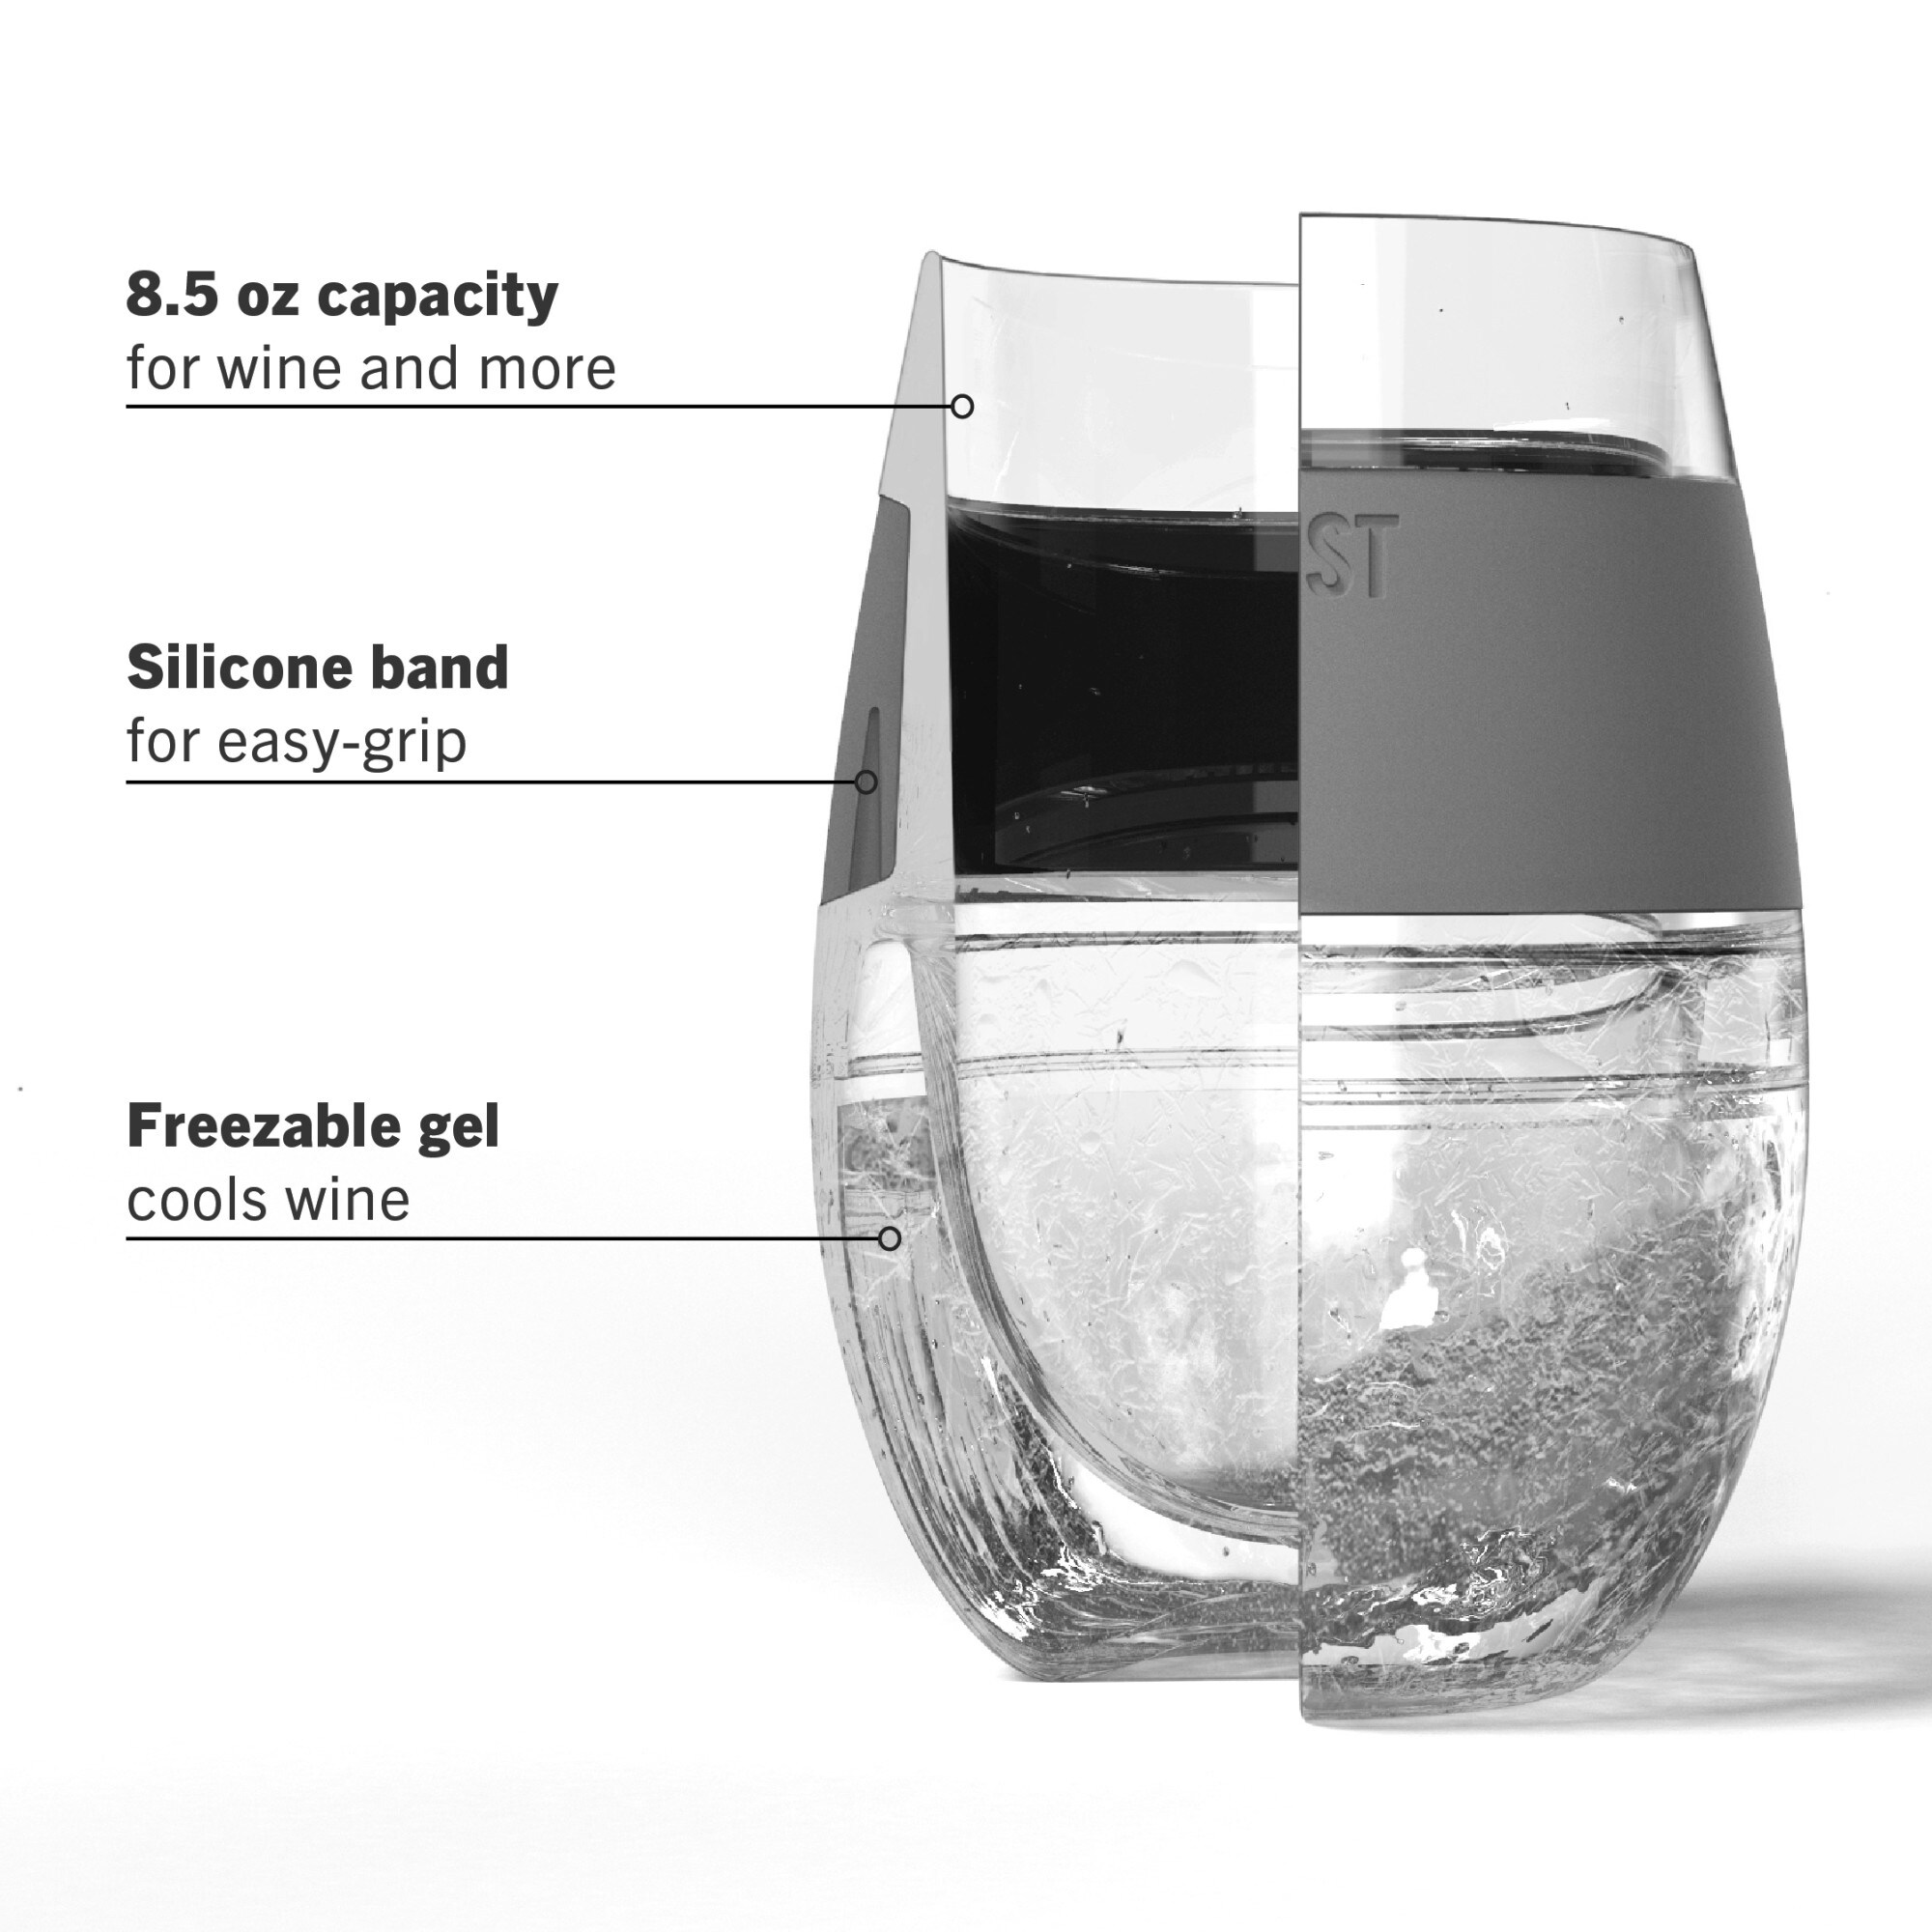 Wine FREEZE™ Cooling Cup in Smoke Single